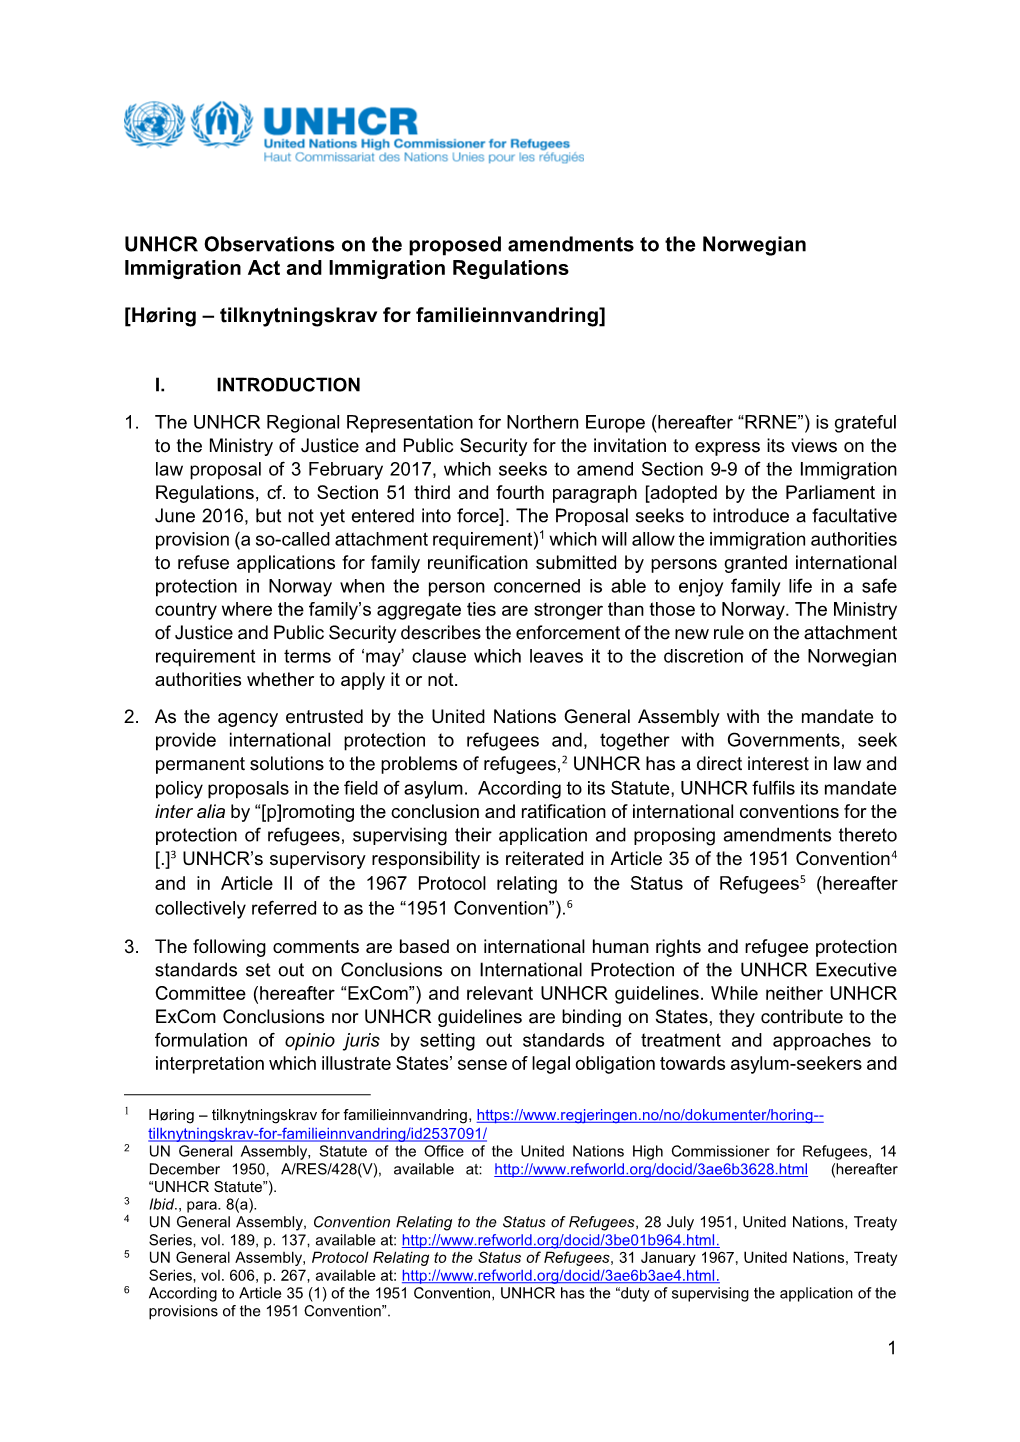 UNHCR Observations on the Proposed Amendments to the Norwegian Immigration Act and Immigration Regulations